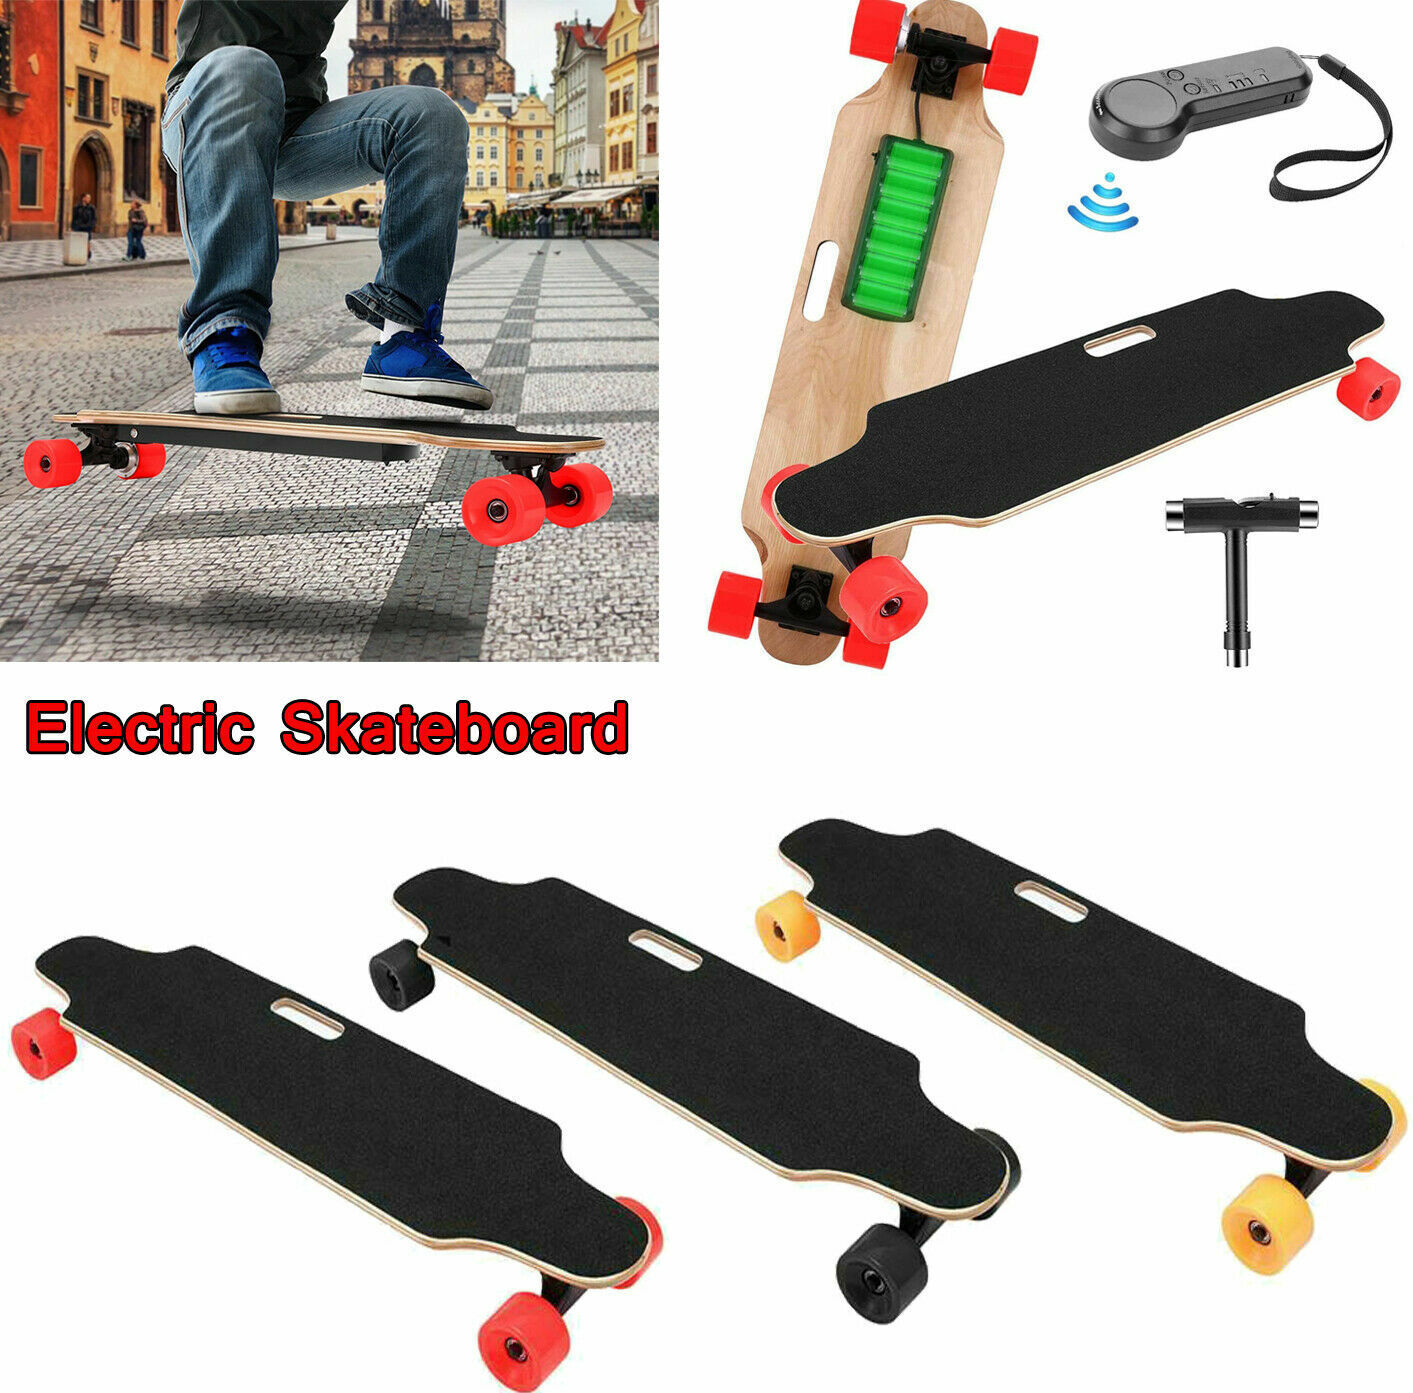 NEW Electric Skateboard Maple Deck Longboard Crusier with Remote